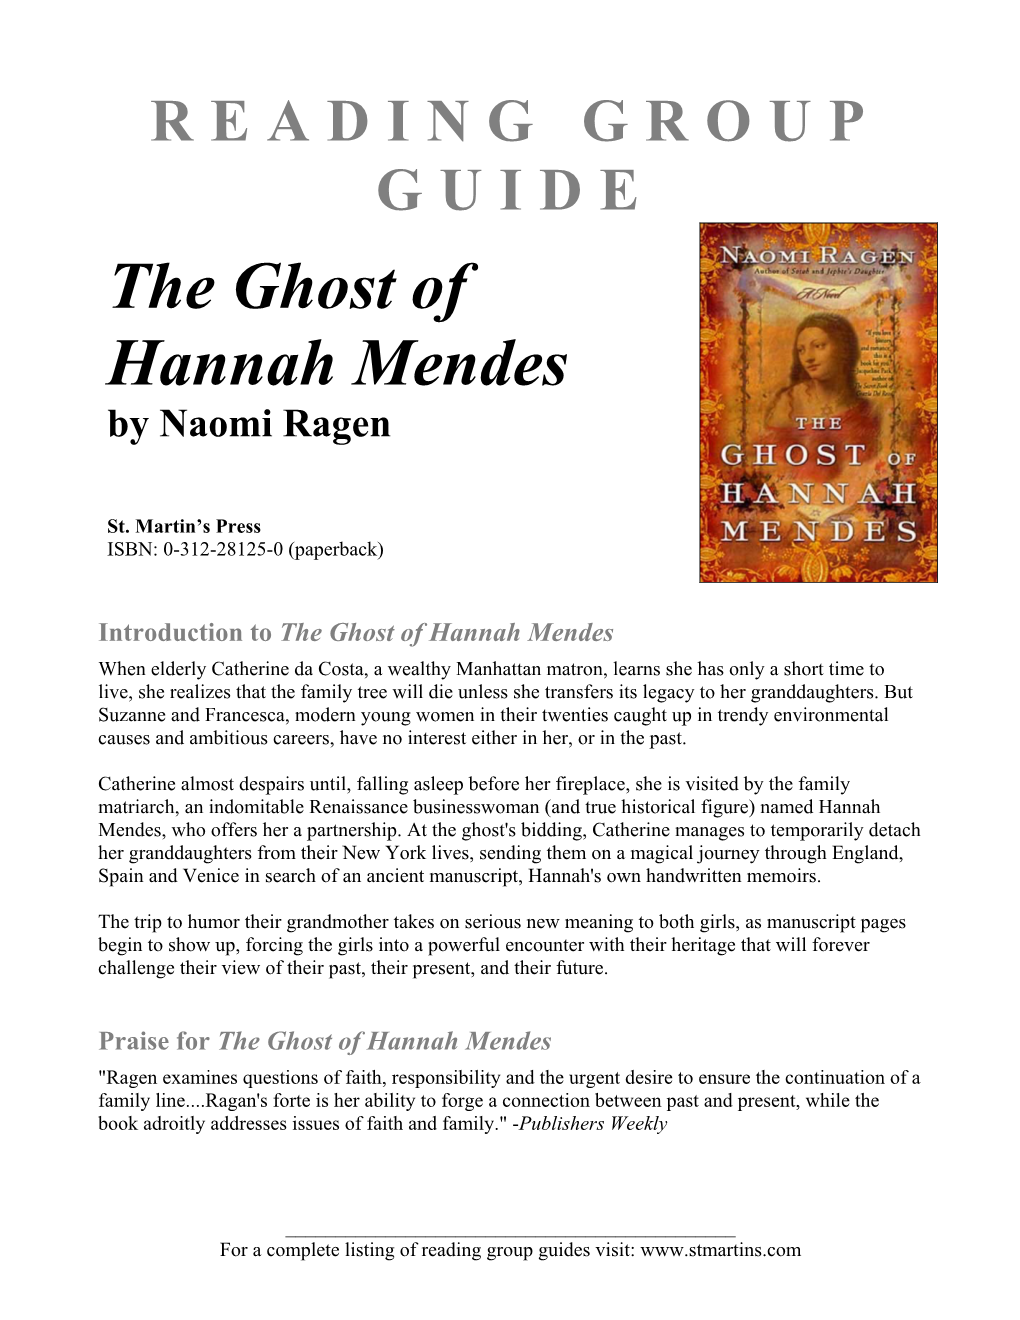 READING GROUP GUIDE the Ghost of Hannah Mendes by Naomi Ragen